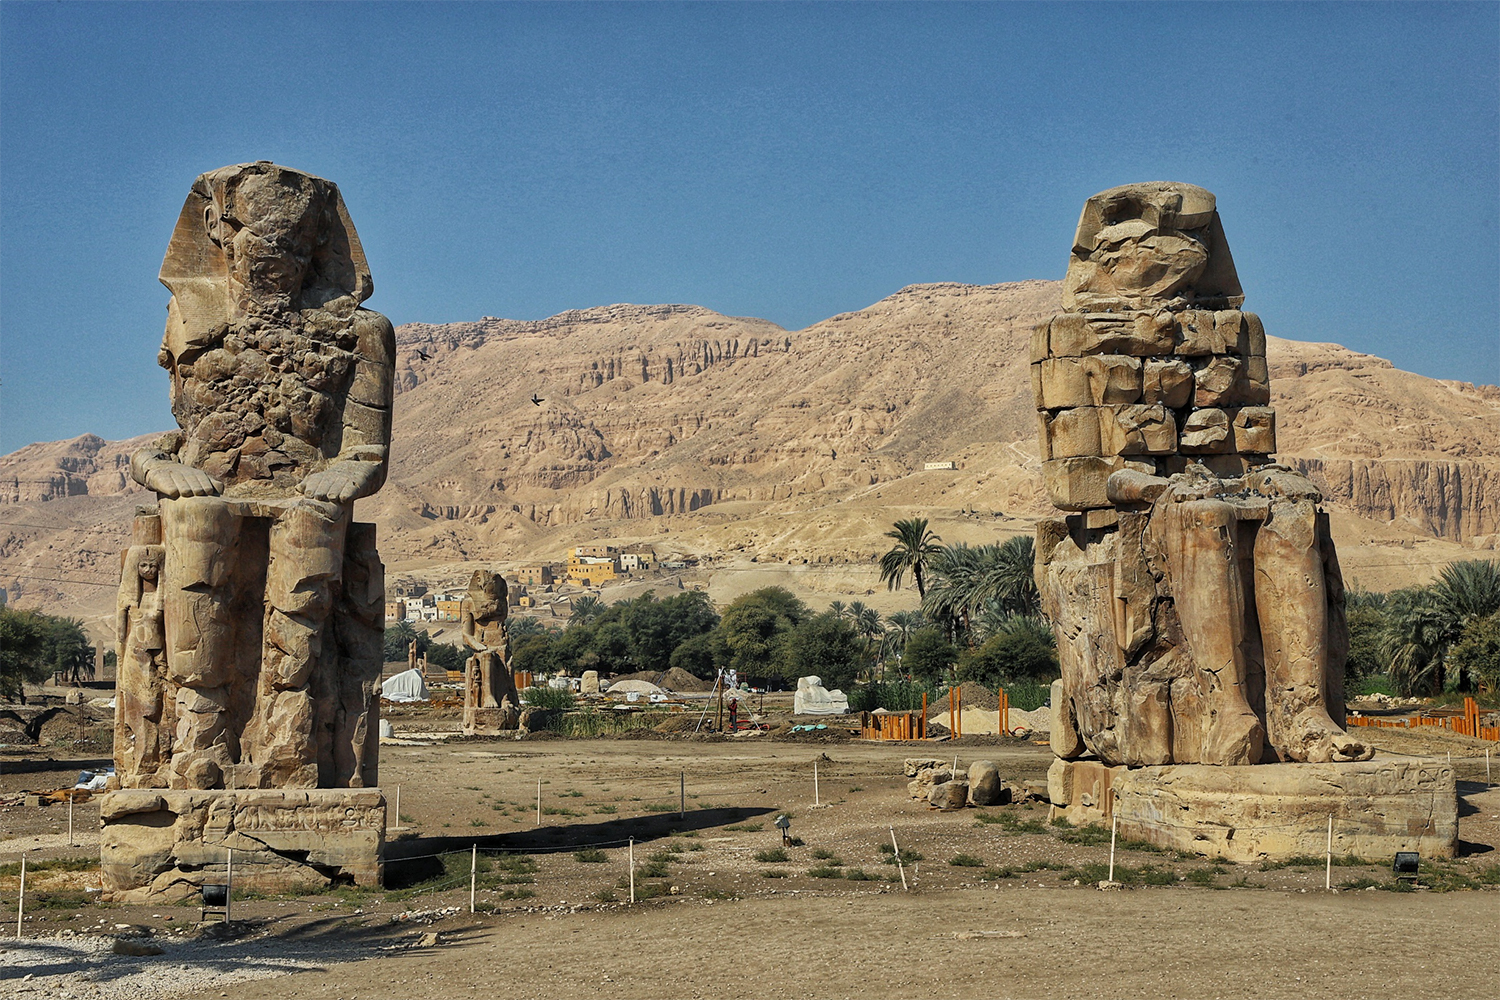 The gigantic Colossi of Memnon, two statues across the Nile River from Luxor